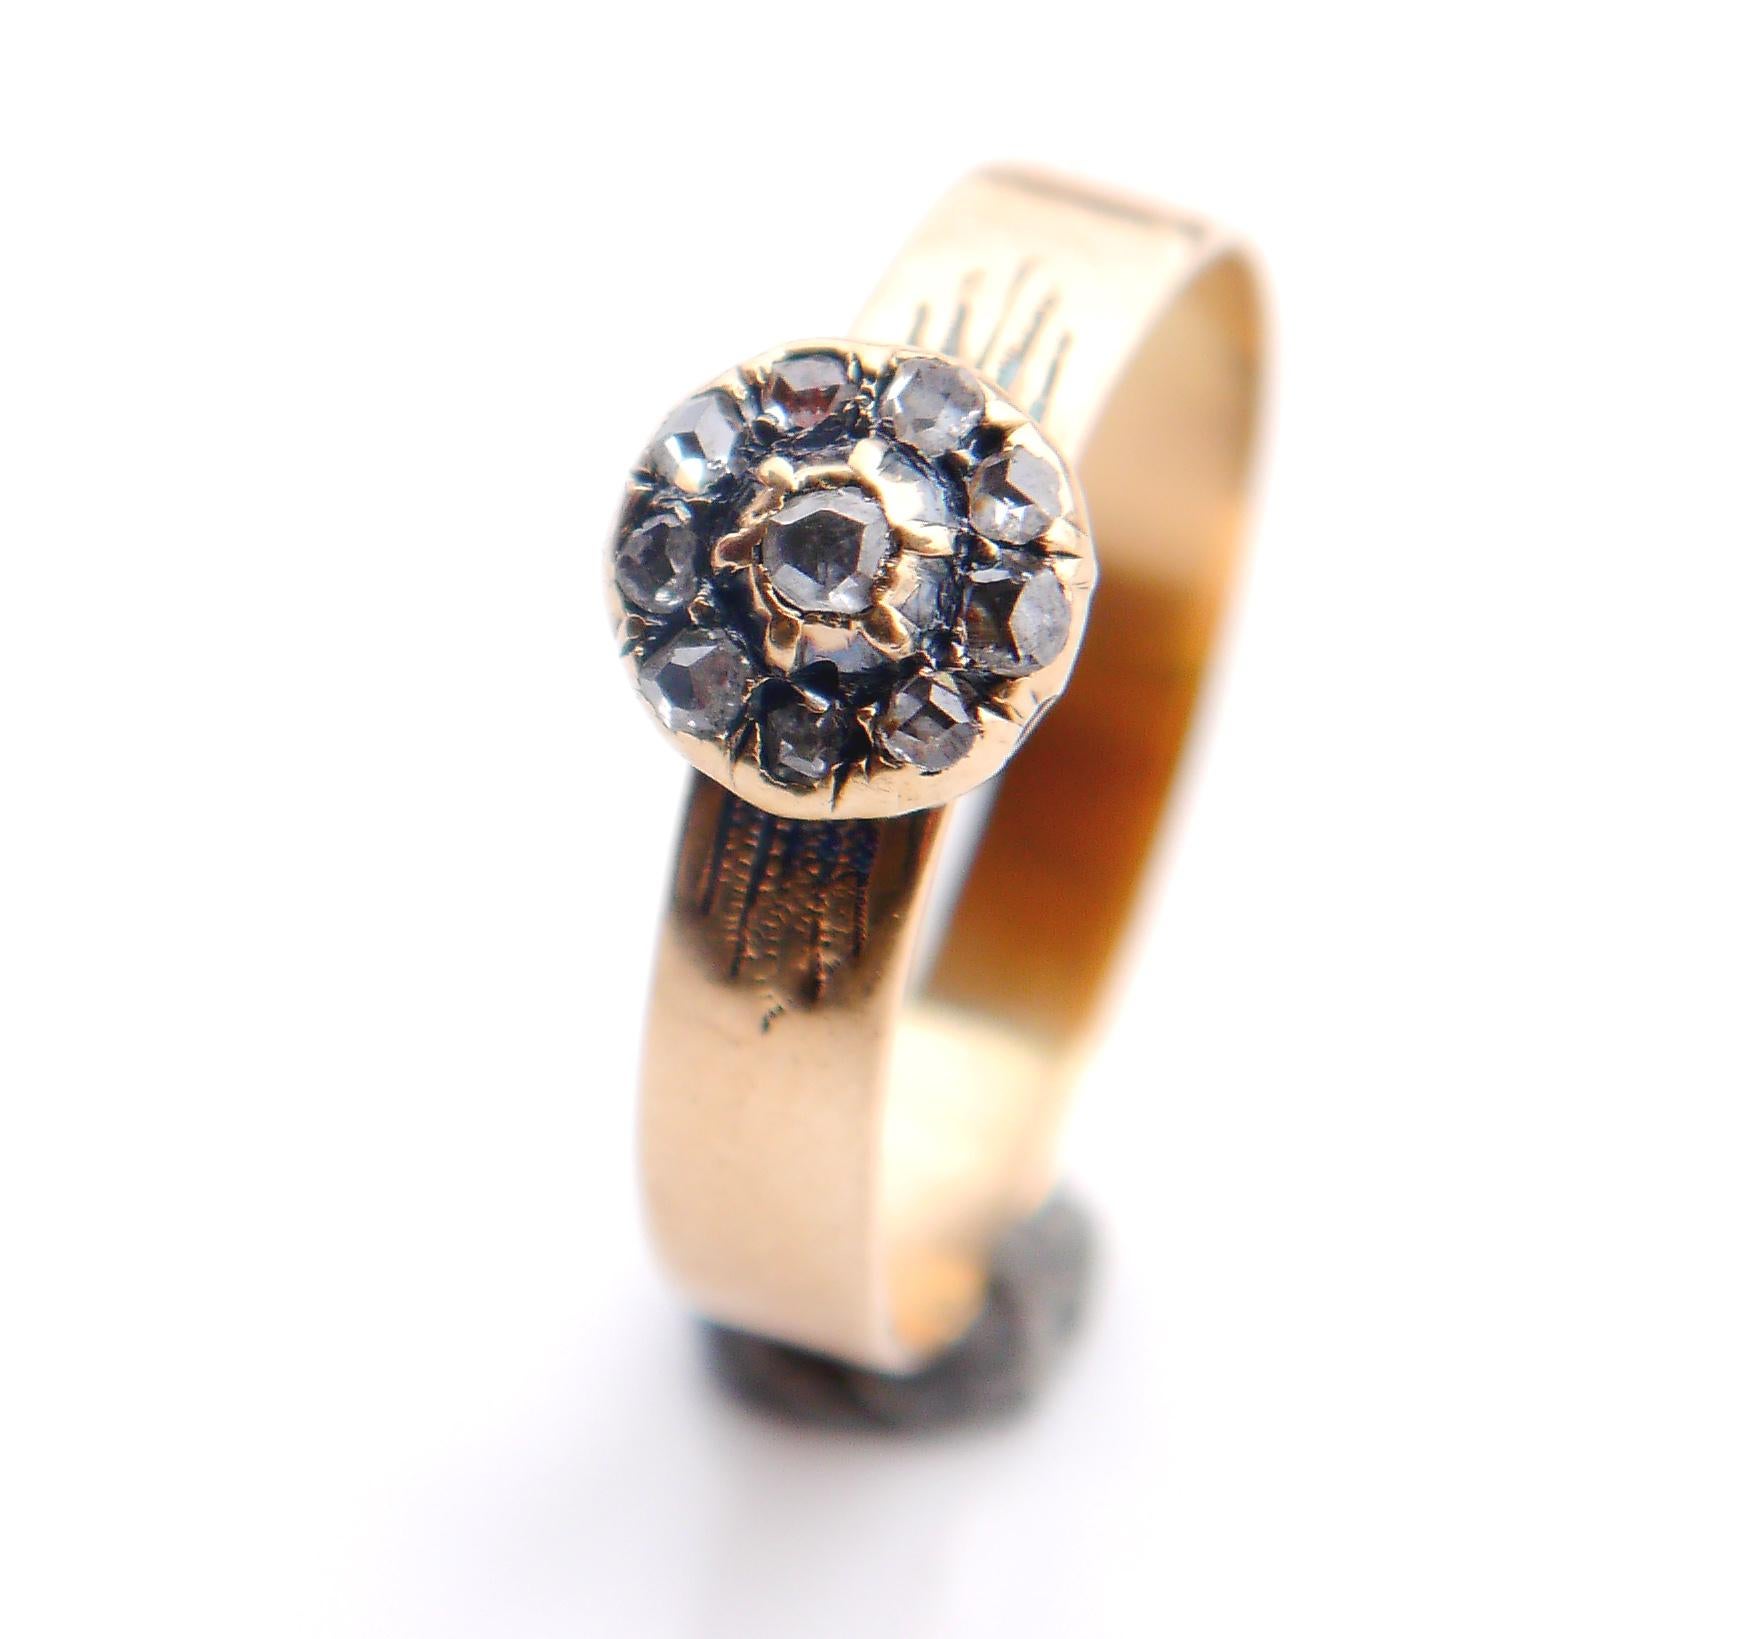 Antique Halo type Ring featuring solid 14K Yellow Gold frame with 10 rose cut Diamonds /foiled under with closed backs.

No hallmarks, likely German ring, ca. 1900s -1930s.
The band is 3.5 mm wide. Crown's Ø 8 mm. Weight: 2.7 grams

Size: Ø 9 US /